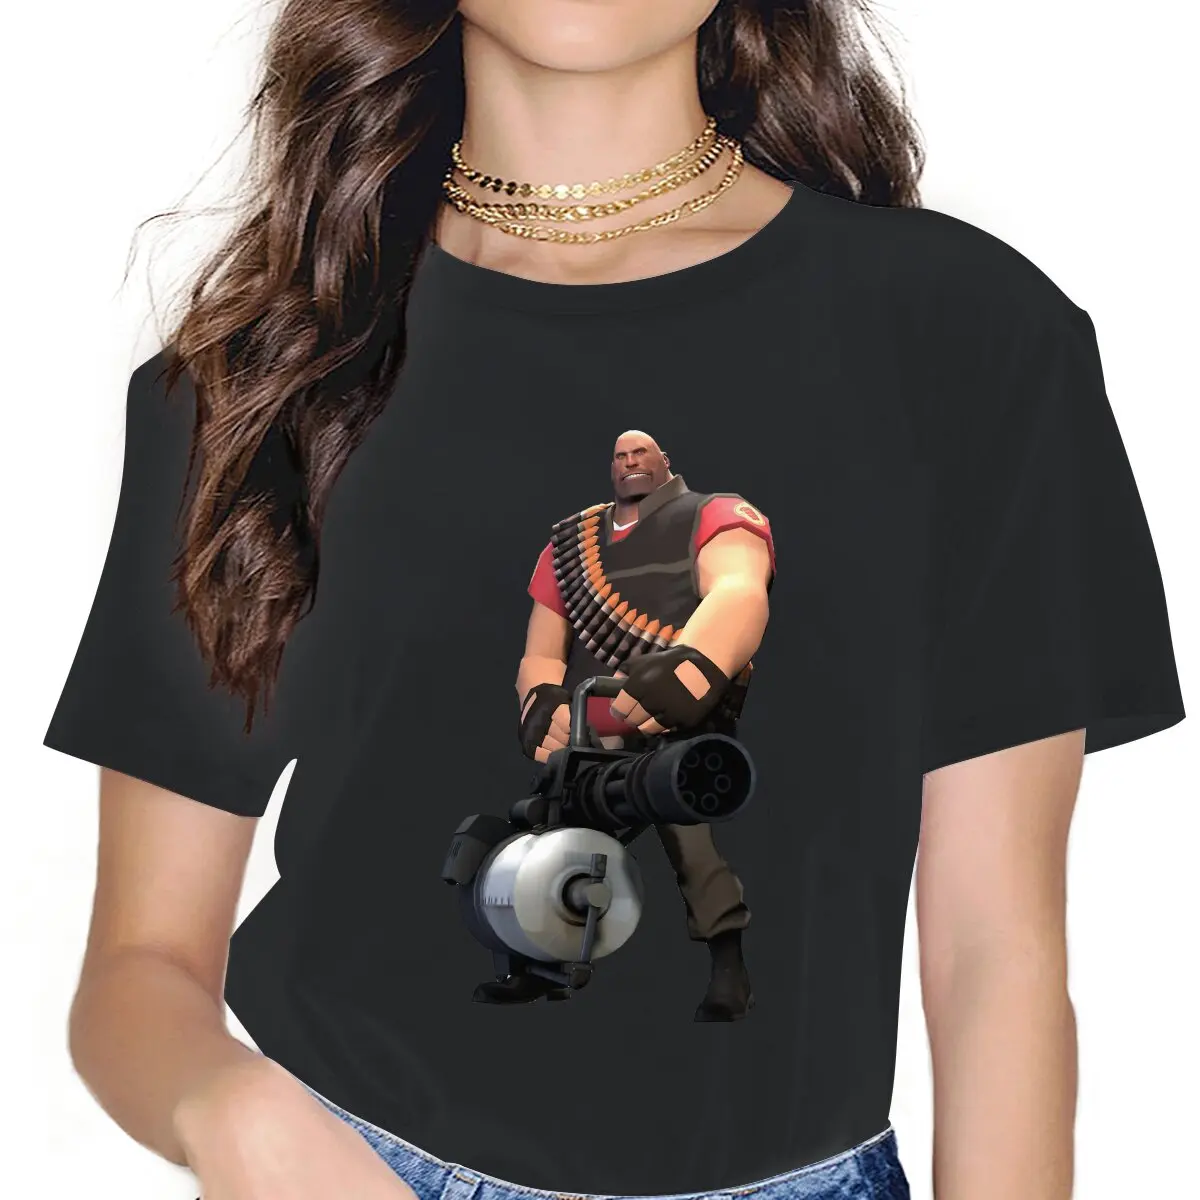 Women s Angry Heavy T Shirts Team Fortress 2 Shooter Game Pure Cotton Clothes Funny Short - Team Fortress 2 Merch